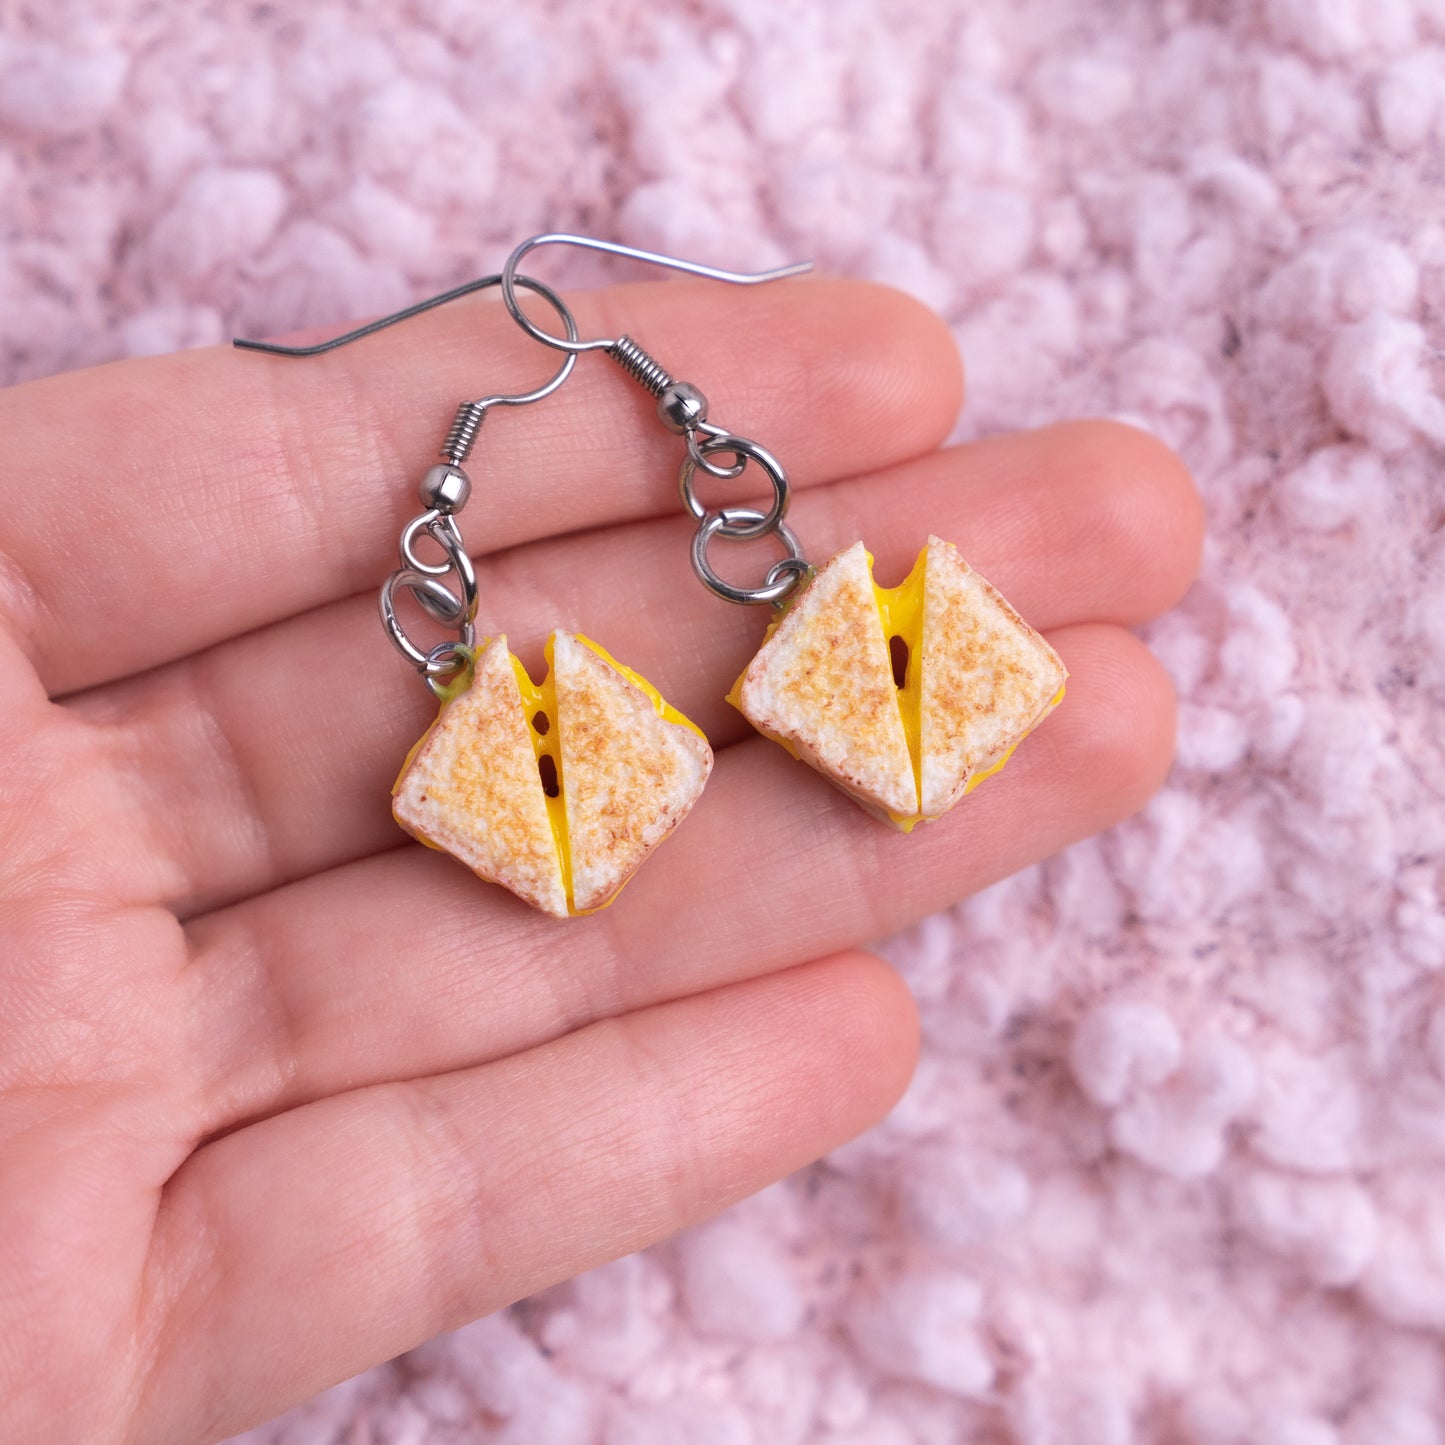 Grilled Cheese Earrings